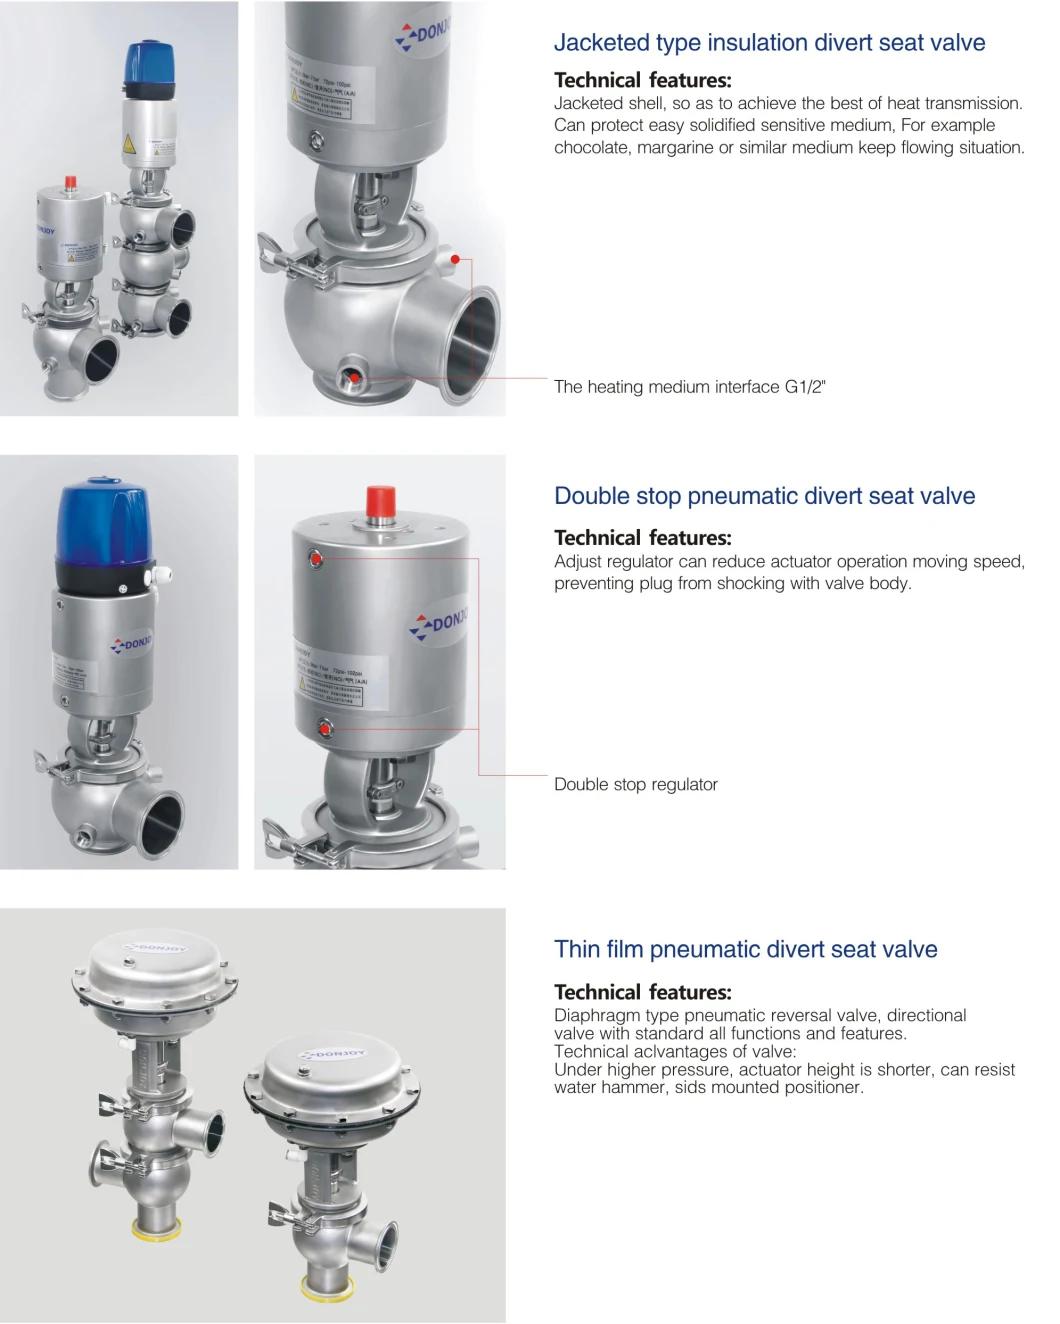 3A Certified Sanitary Shut-off and Diverter Valve for Food Beverage